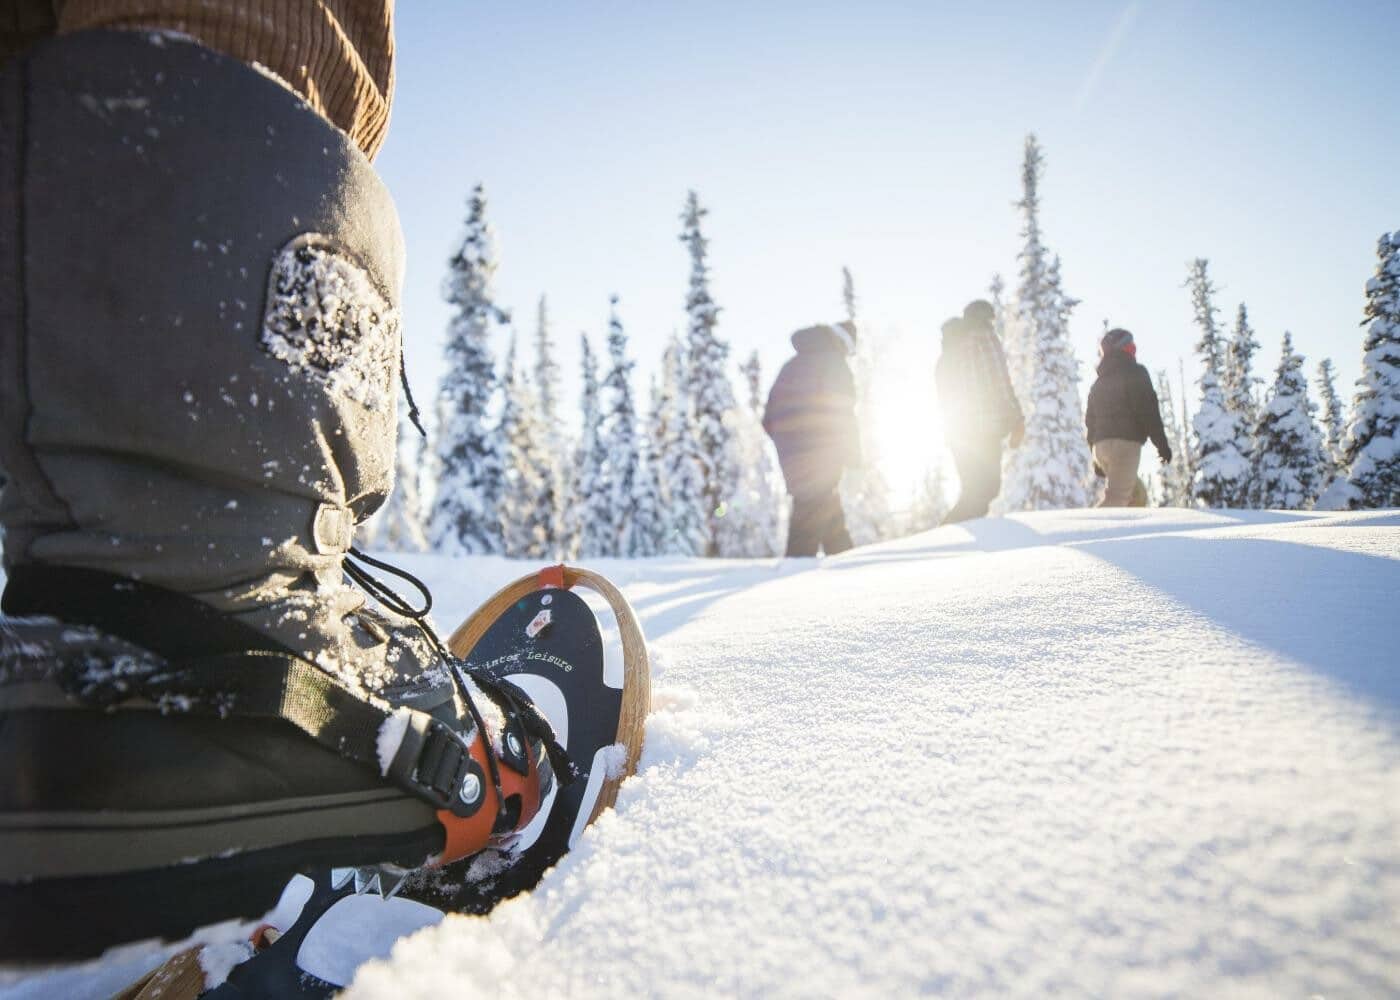 Snowshoeing is one of the best ways to enjoy the scenic beauty of Vermont in winter